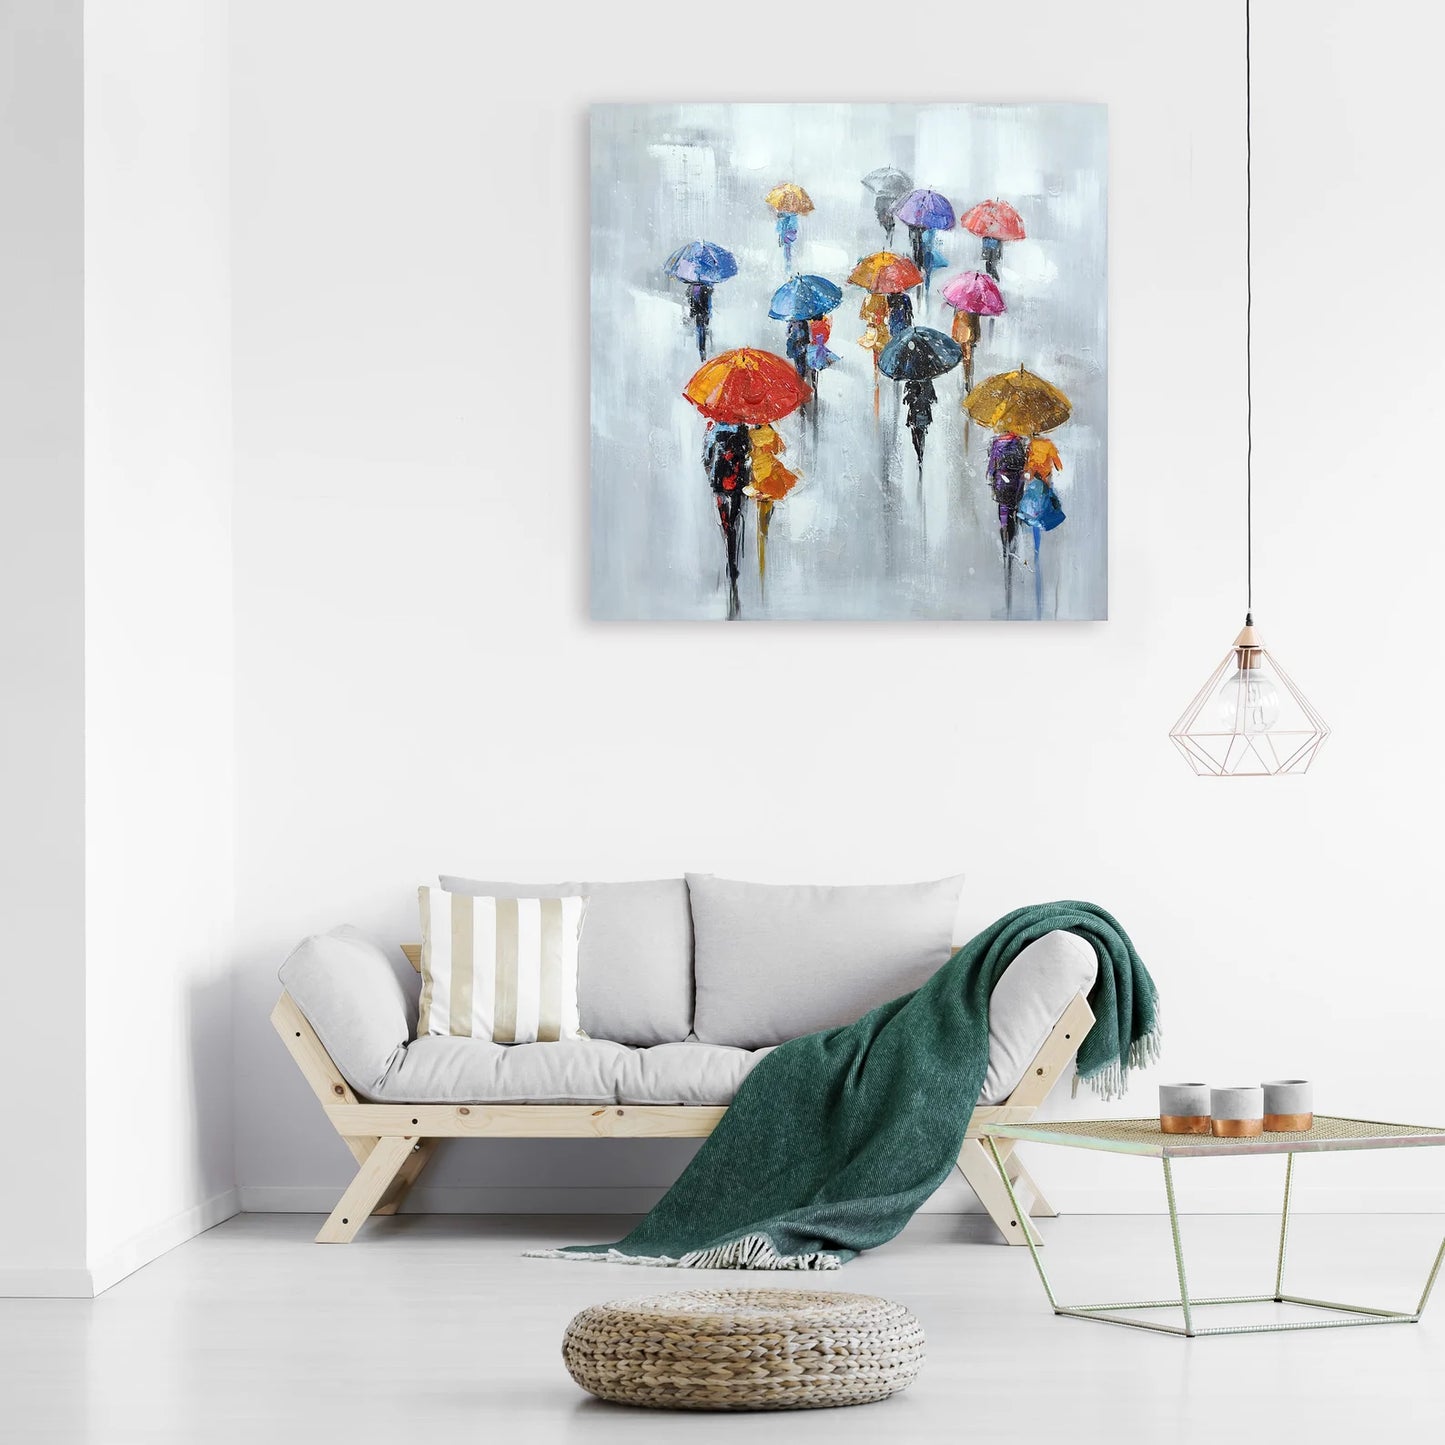 Hand-painted Abstract Art "Umbrellas in the City" painting original, Wall art for living room, bedroom, office - Wrapped Canvas Painting